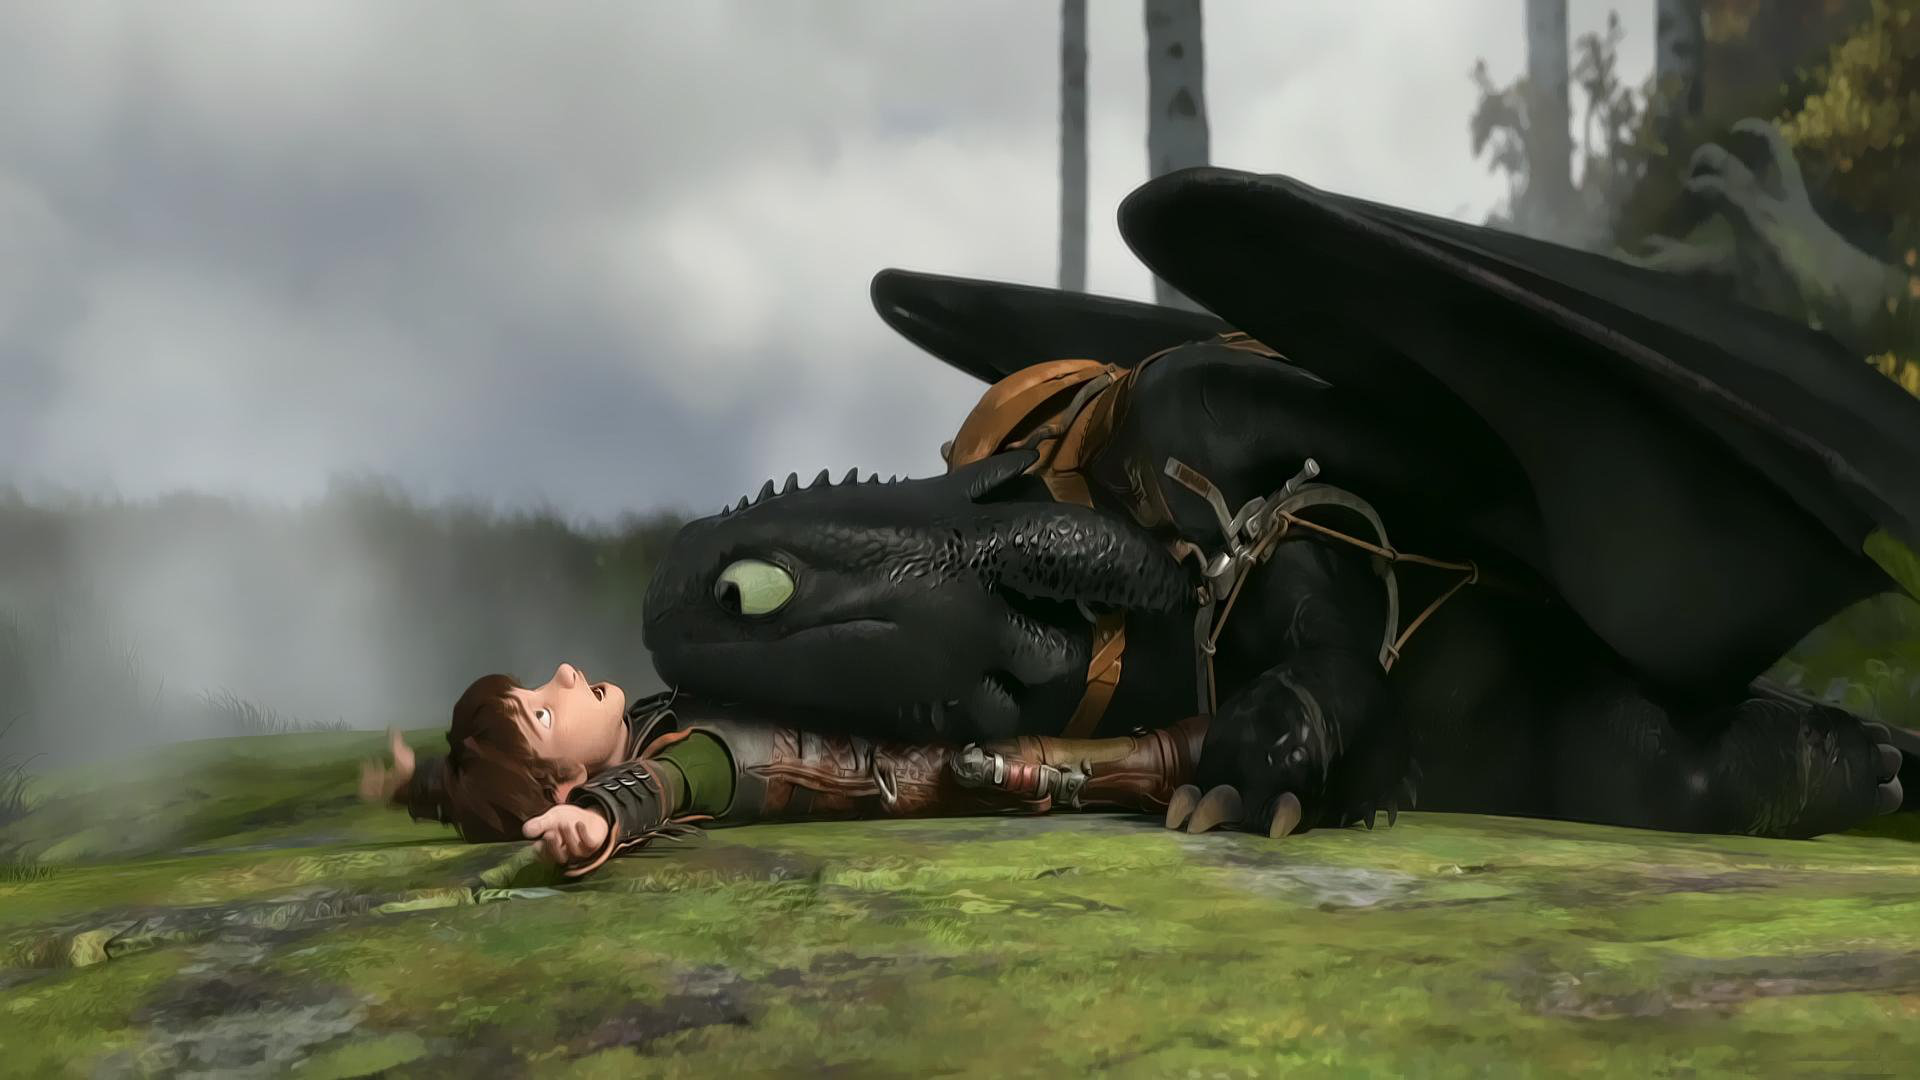 Best How To Train Your Dragon 2 Wallpaper Id90221 For High